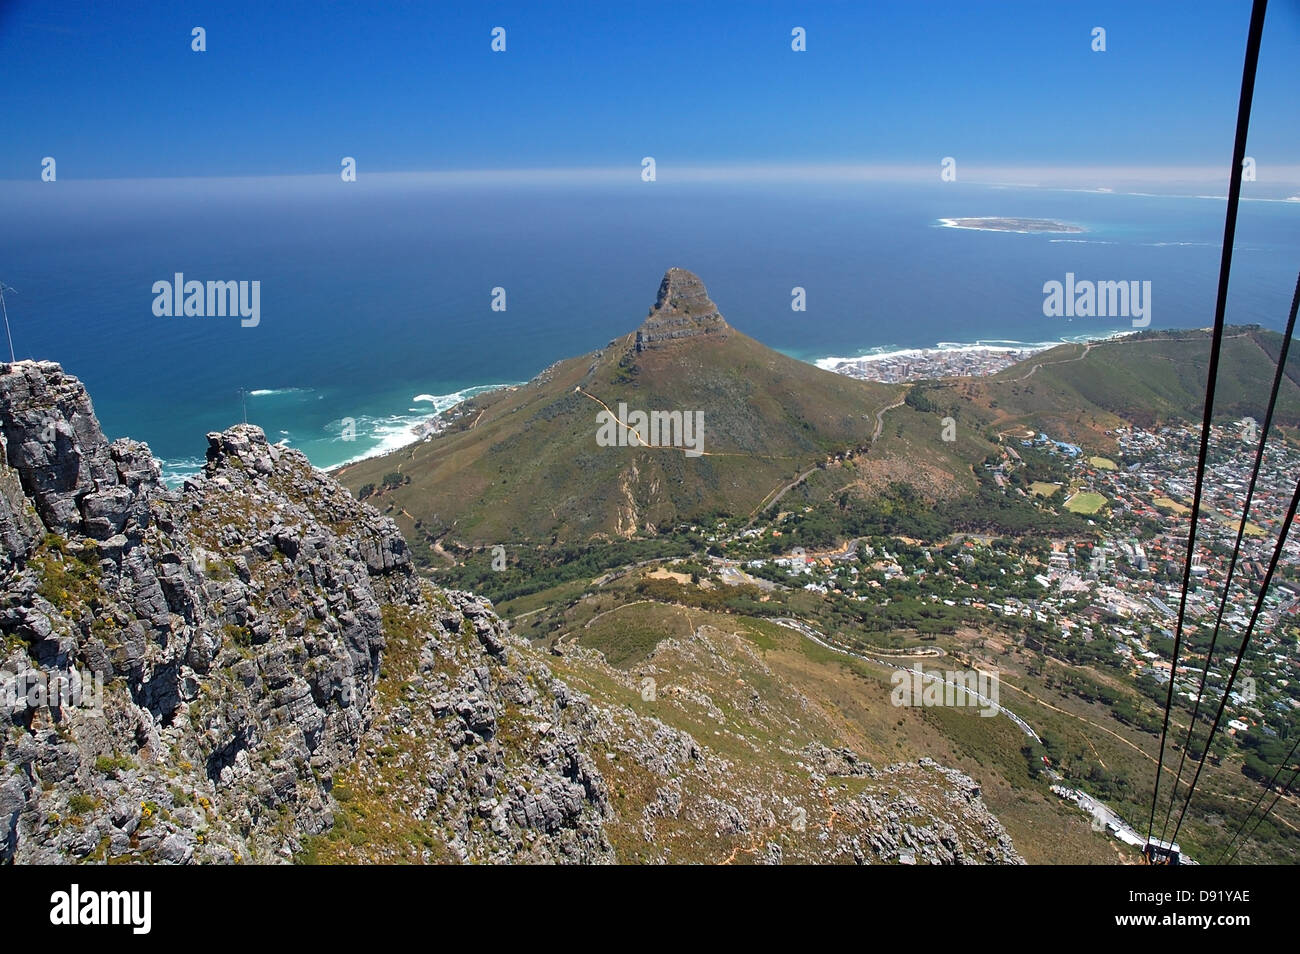 Lion's Head, Robben Island and city from the Table Mountain cable car, Table Mountain National Park, Cape Town, South Africa Stock Photo